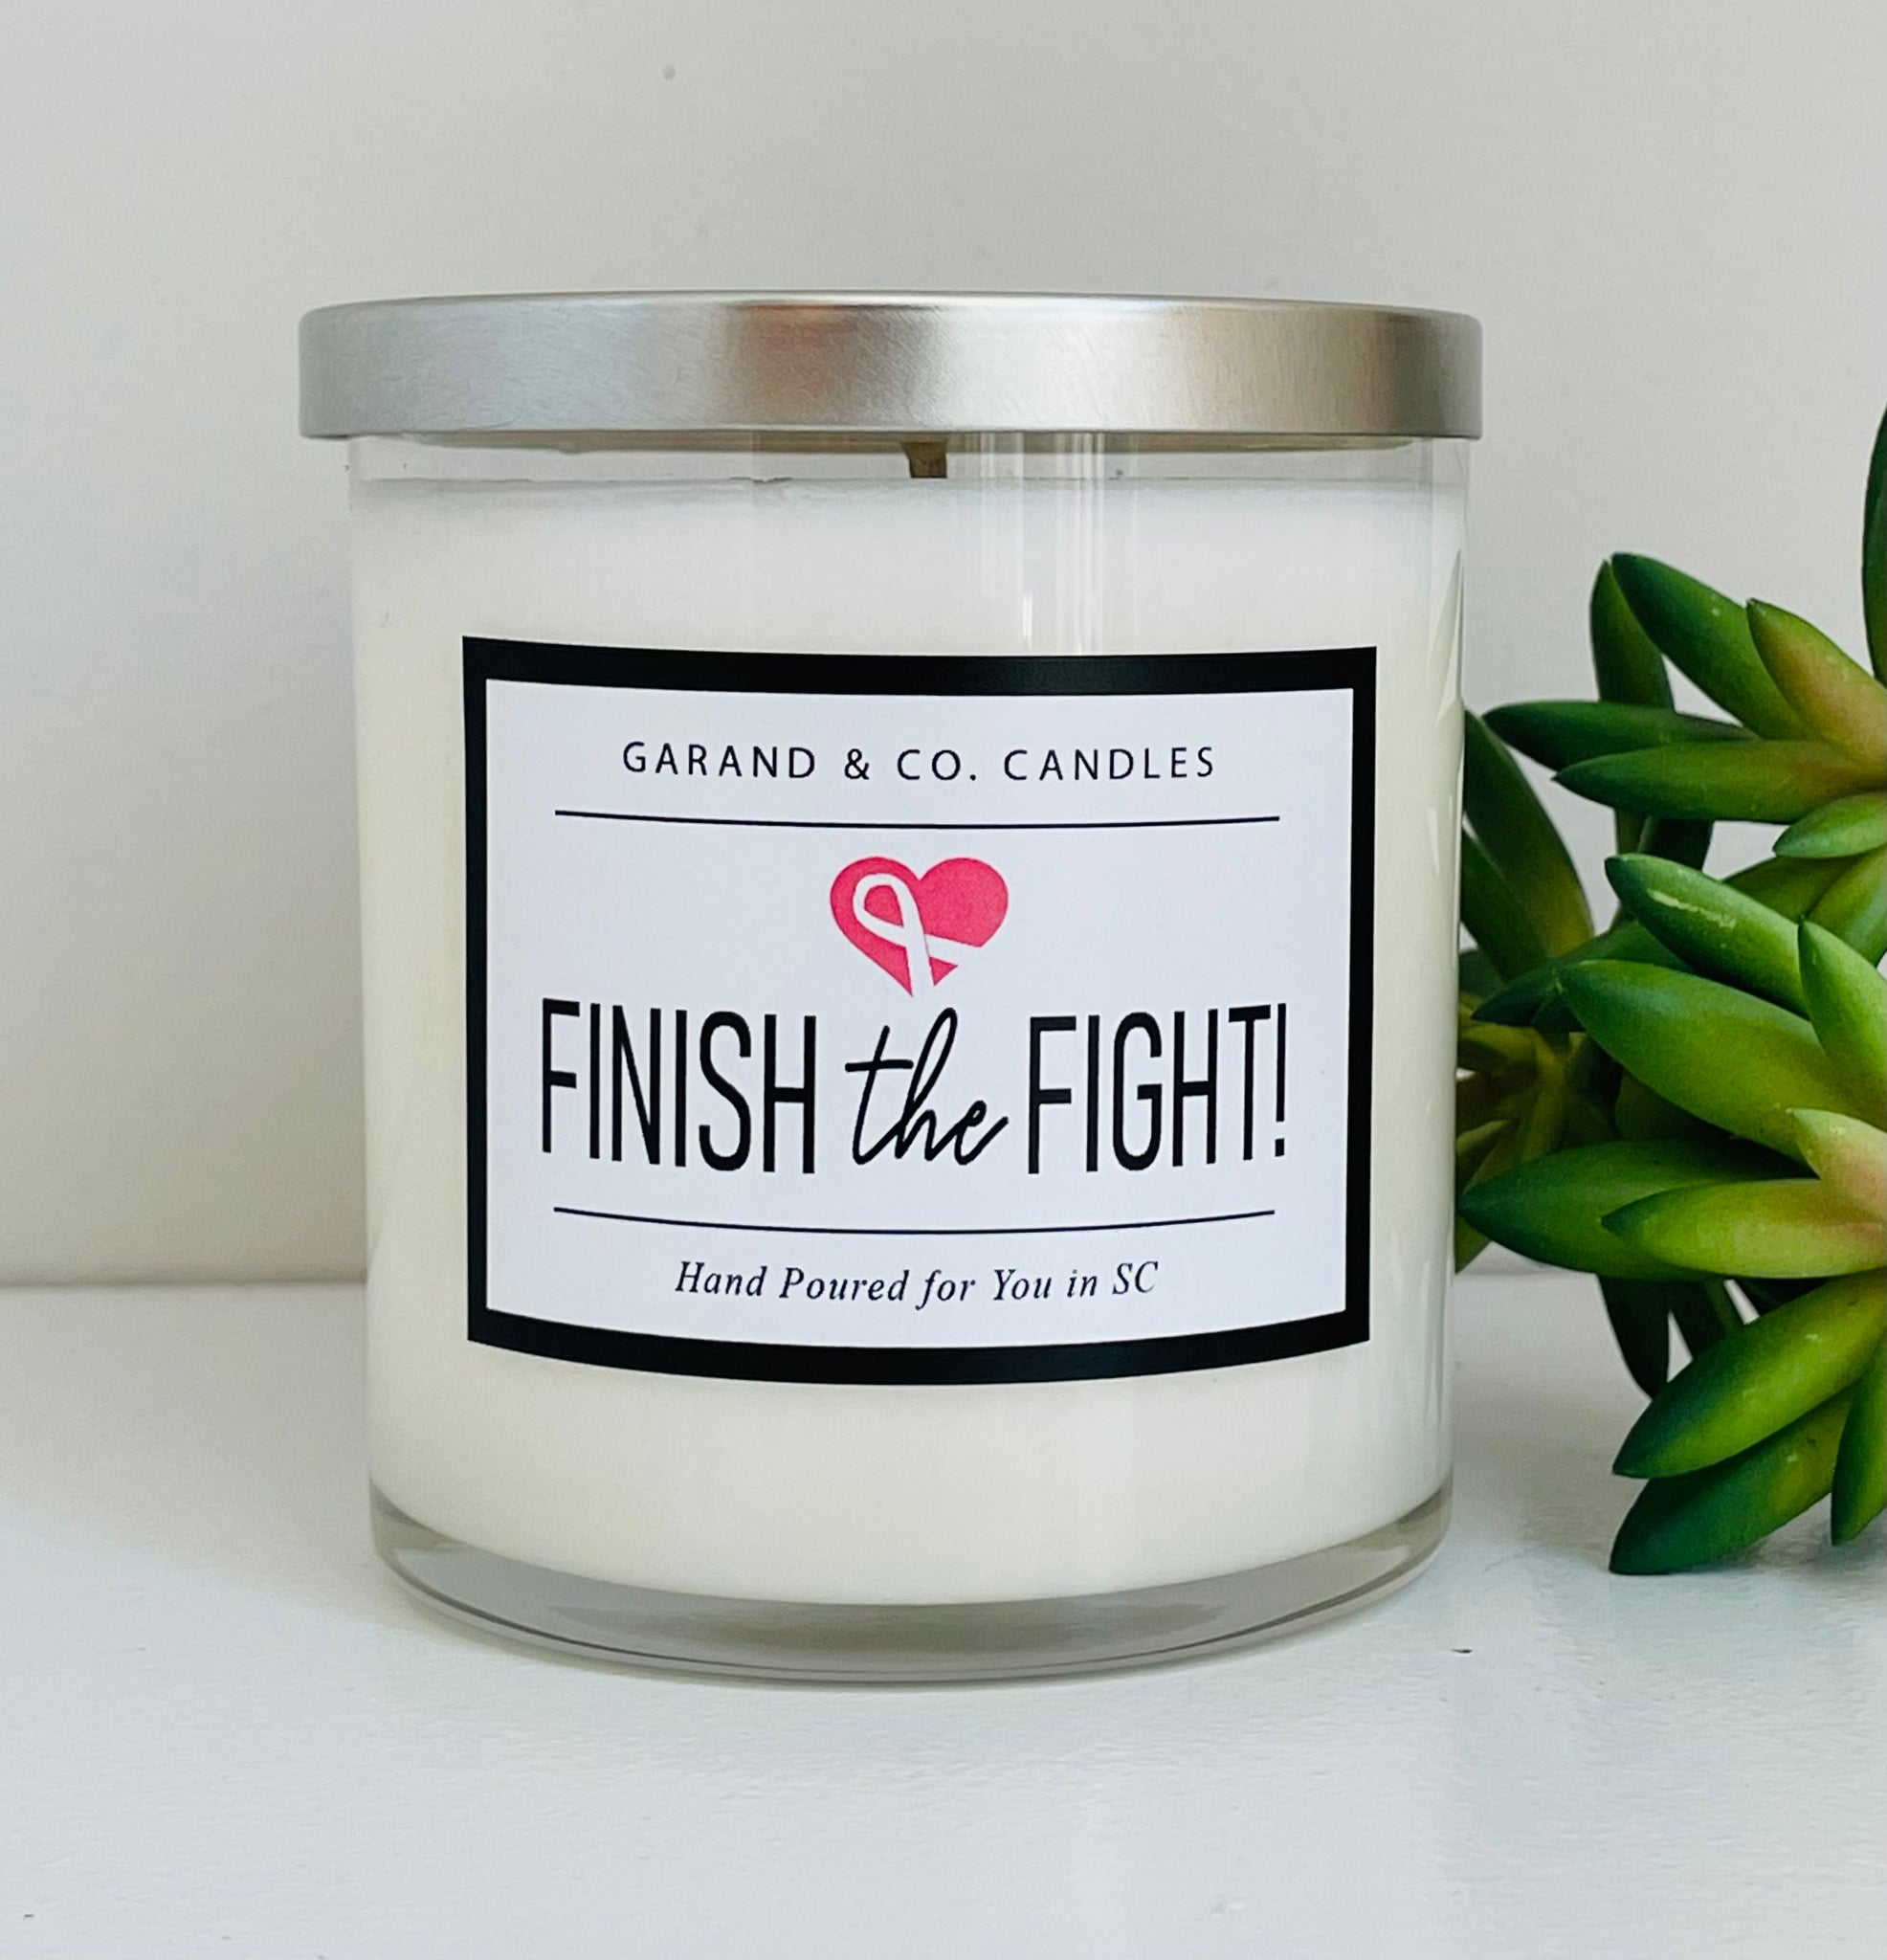 12 oz Clear Glass Jar Candle -  Finish the Fight Pink Heart with Ribbon